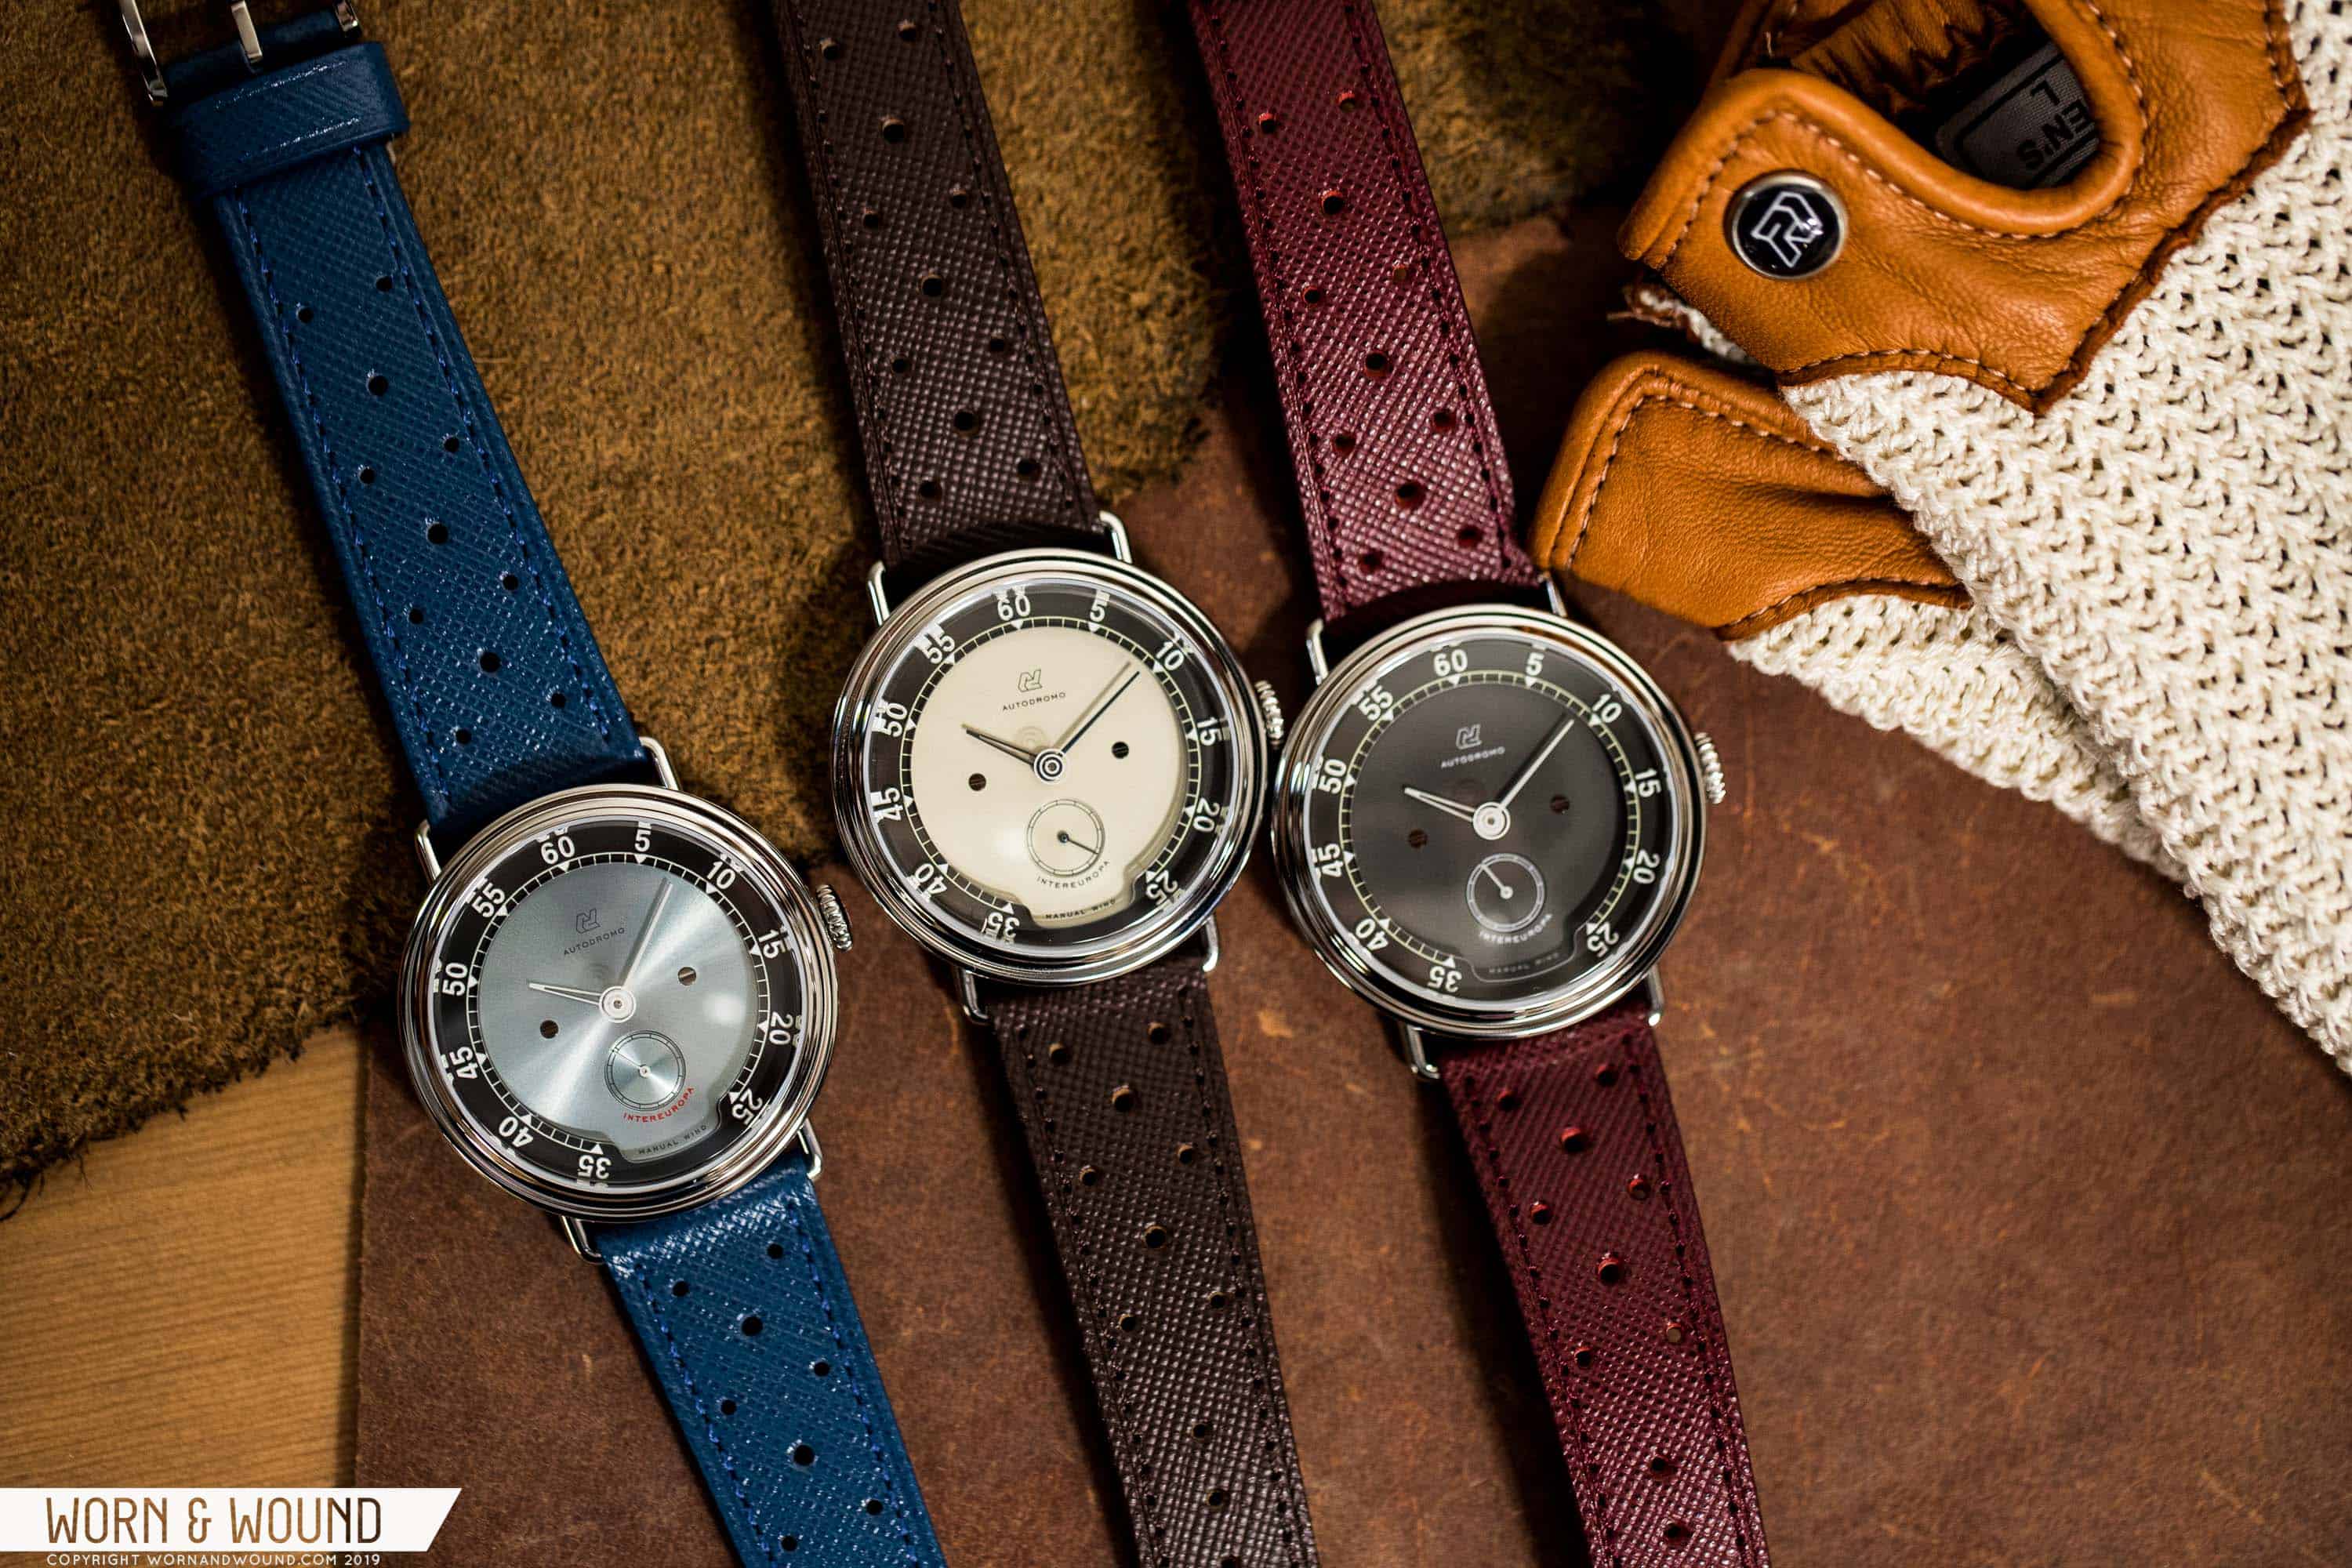 Review: Autodromo Taps ’50s/’60s Era Racing With the New Intereuropa Collection